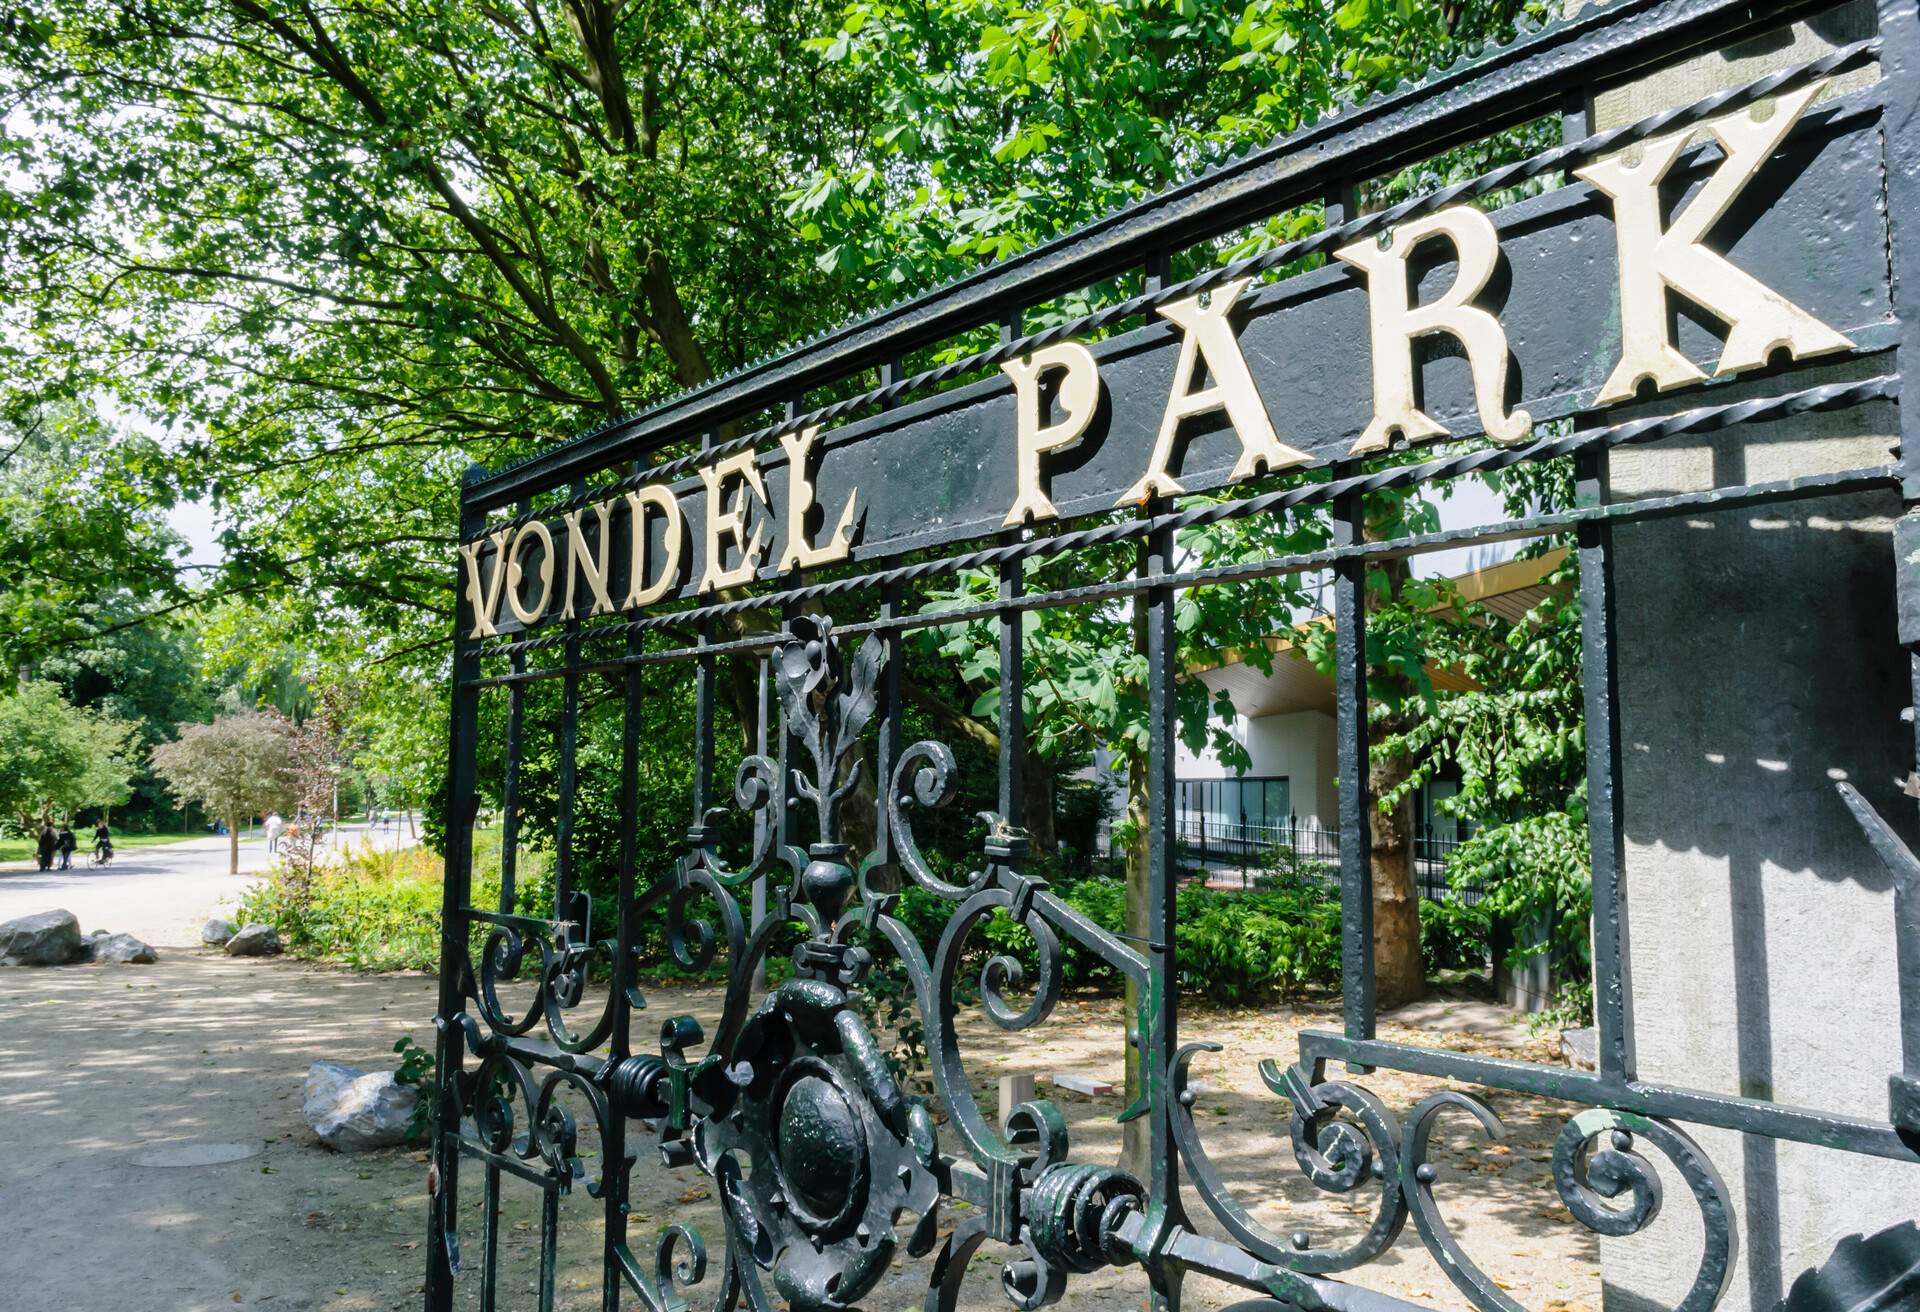 A wrought iron gate with letters that spell VONDEL PARK on it.